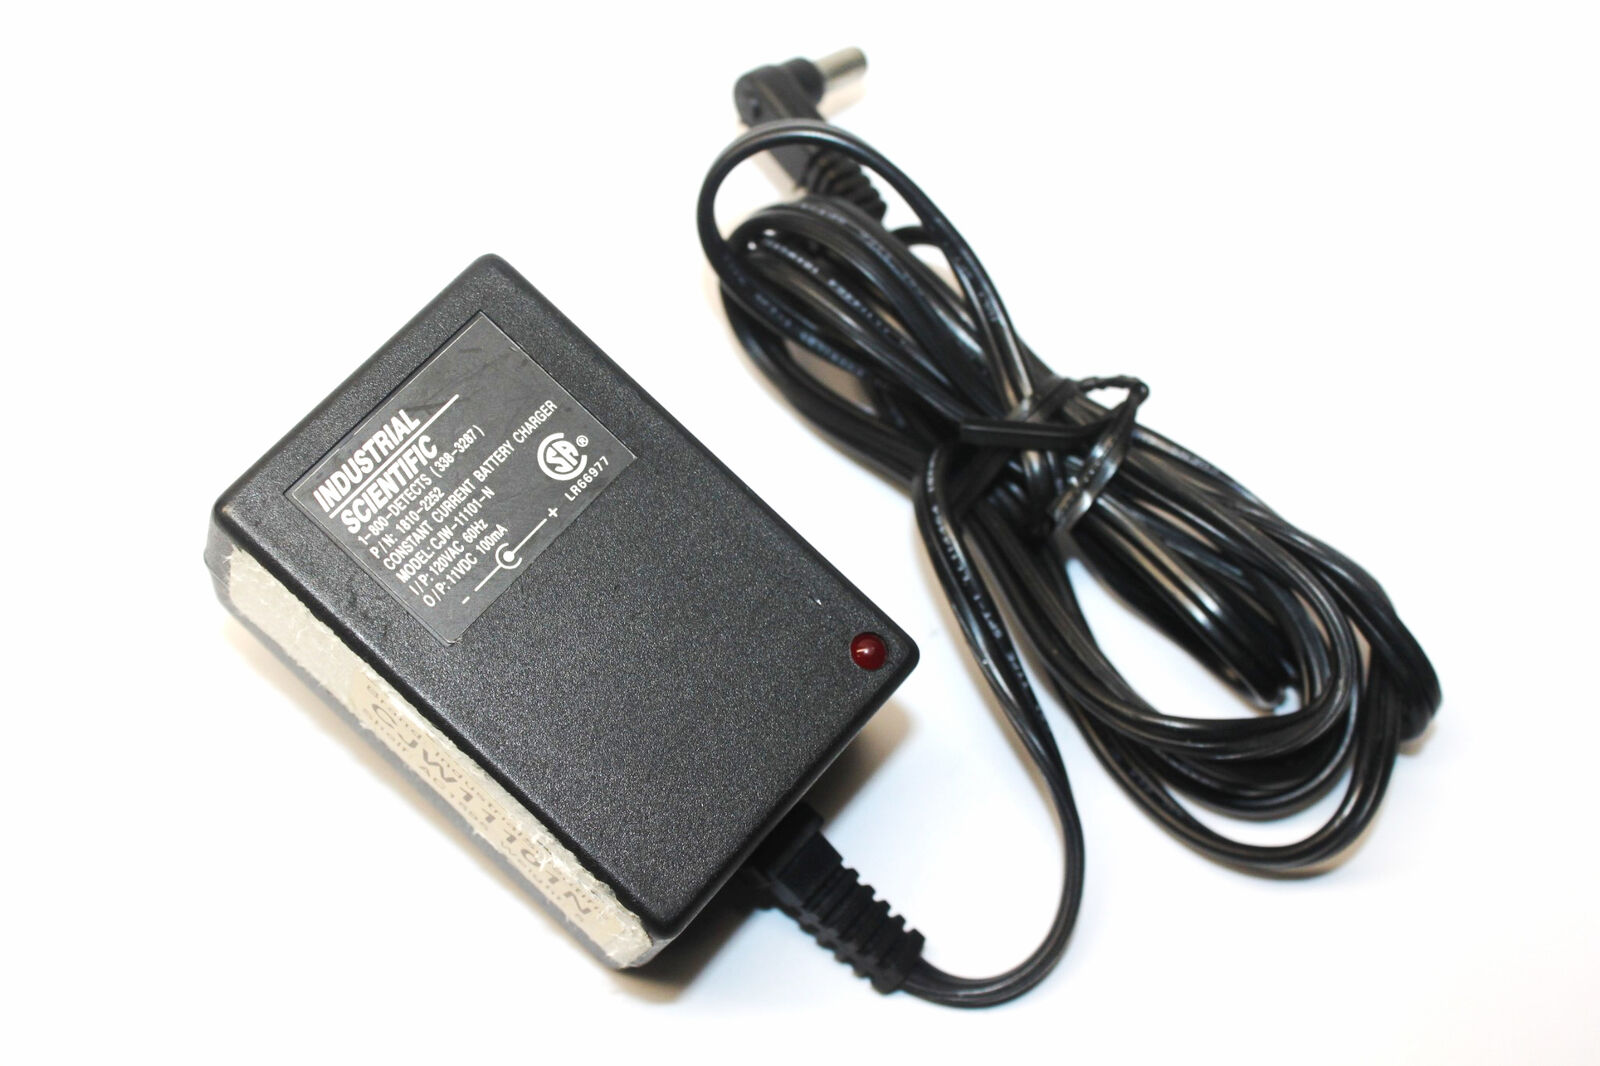 New 11V 100mA Industrial Scientific CJW-11101-N 1810-2252 Battery Charger Power Supply Ac Adapter